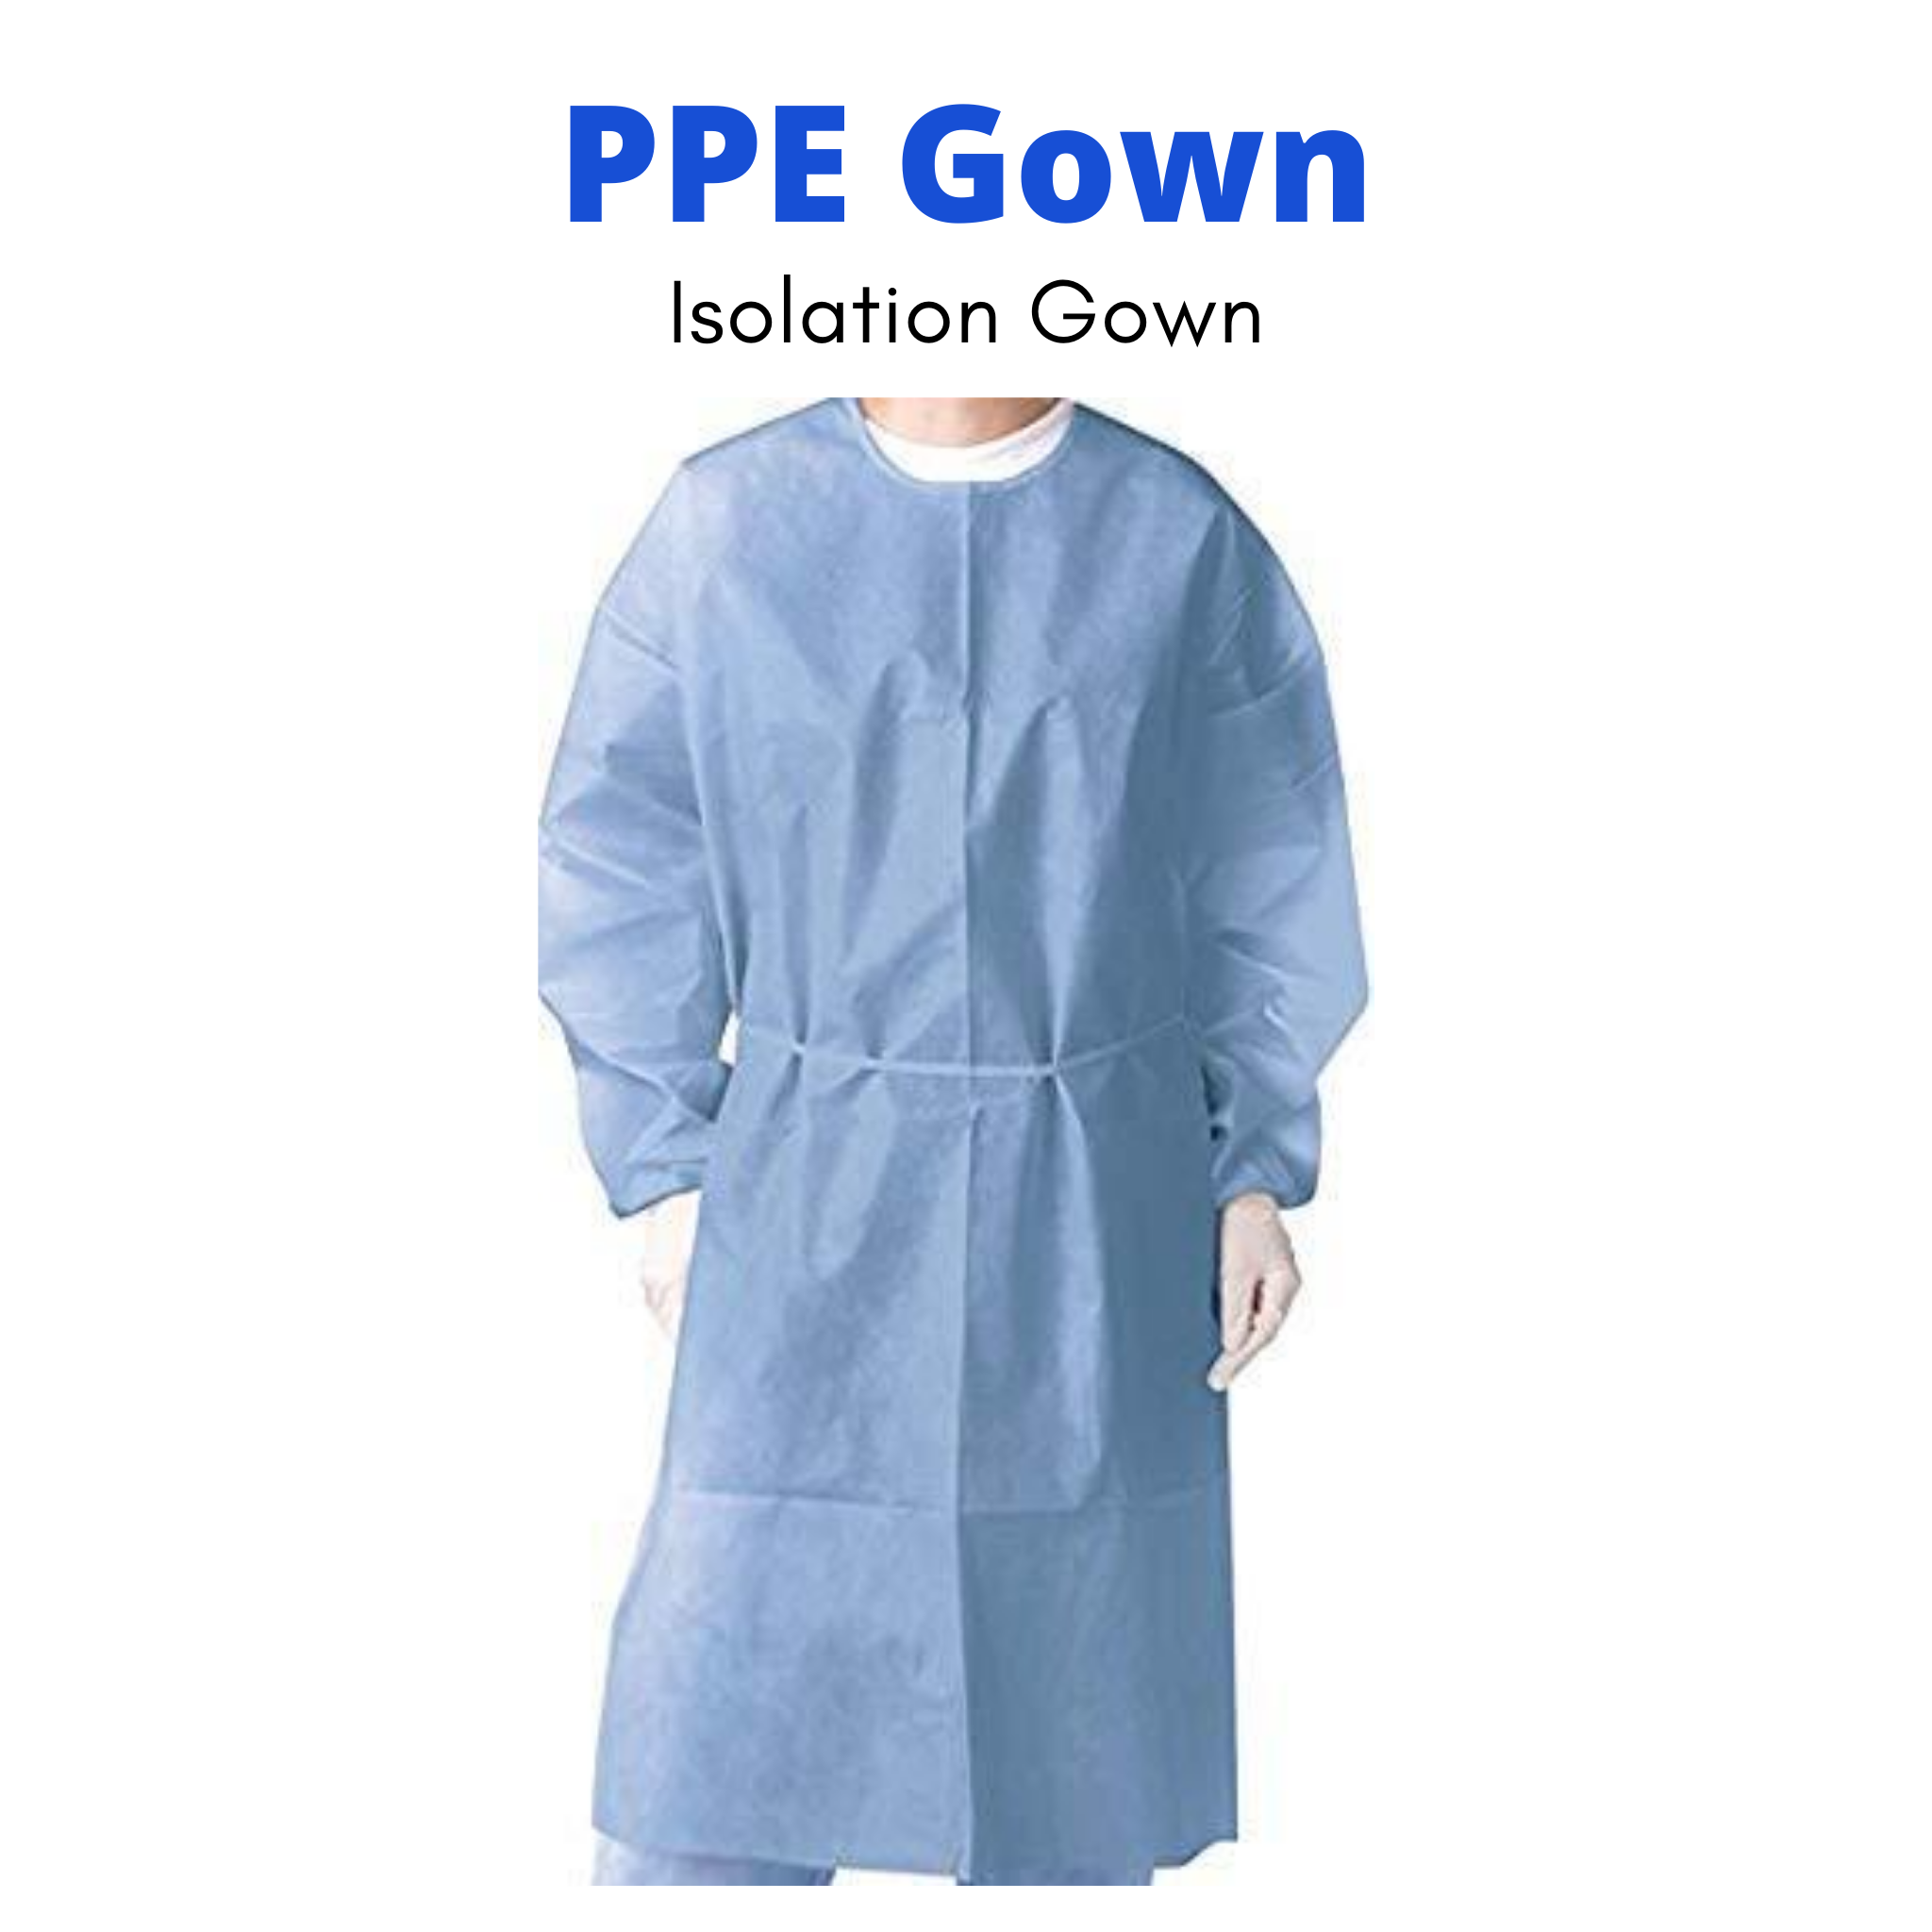 Isolation PPE Gown for Doctors, Nurses, Dentists. This is also called as Hospital Gown